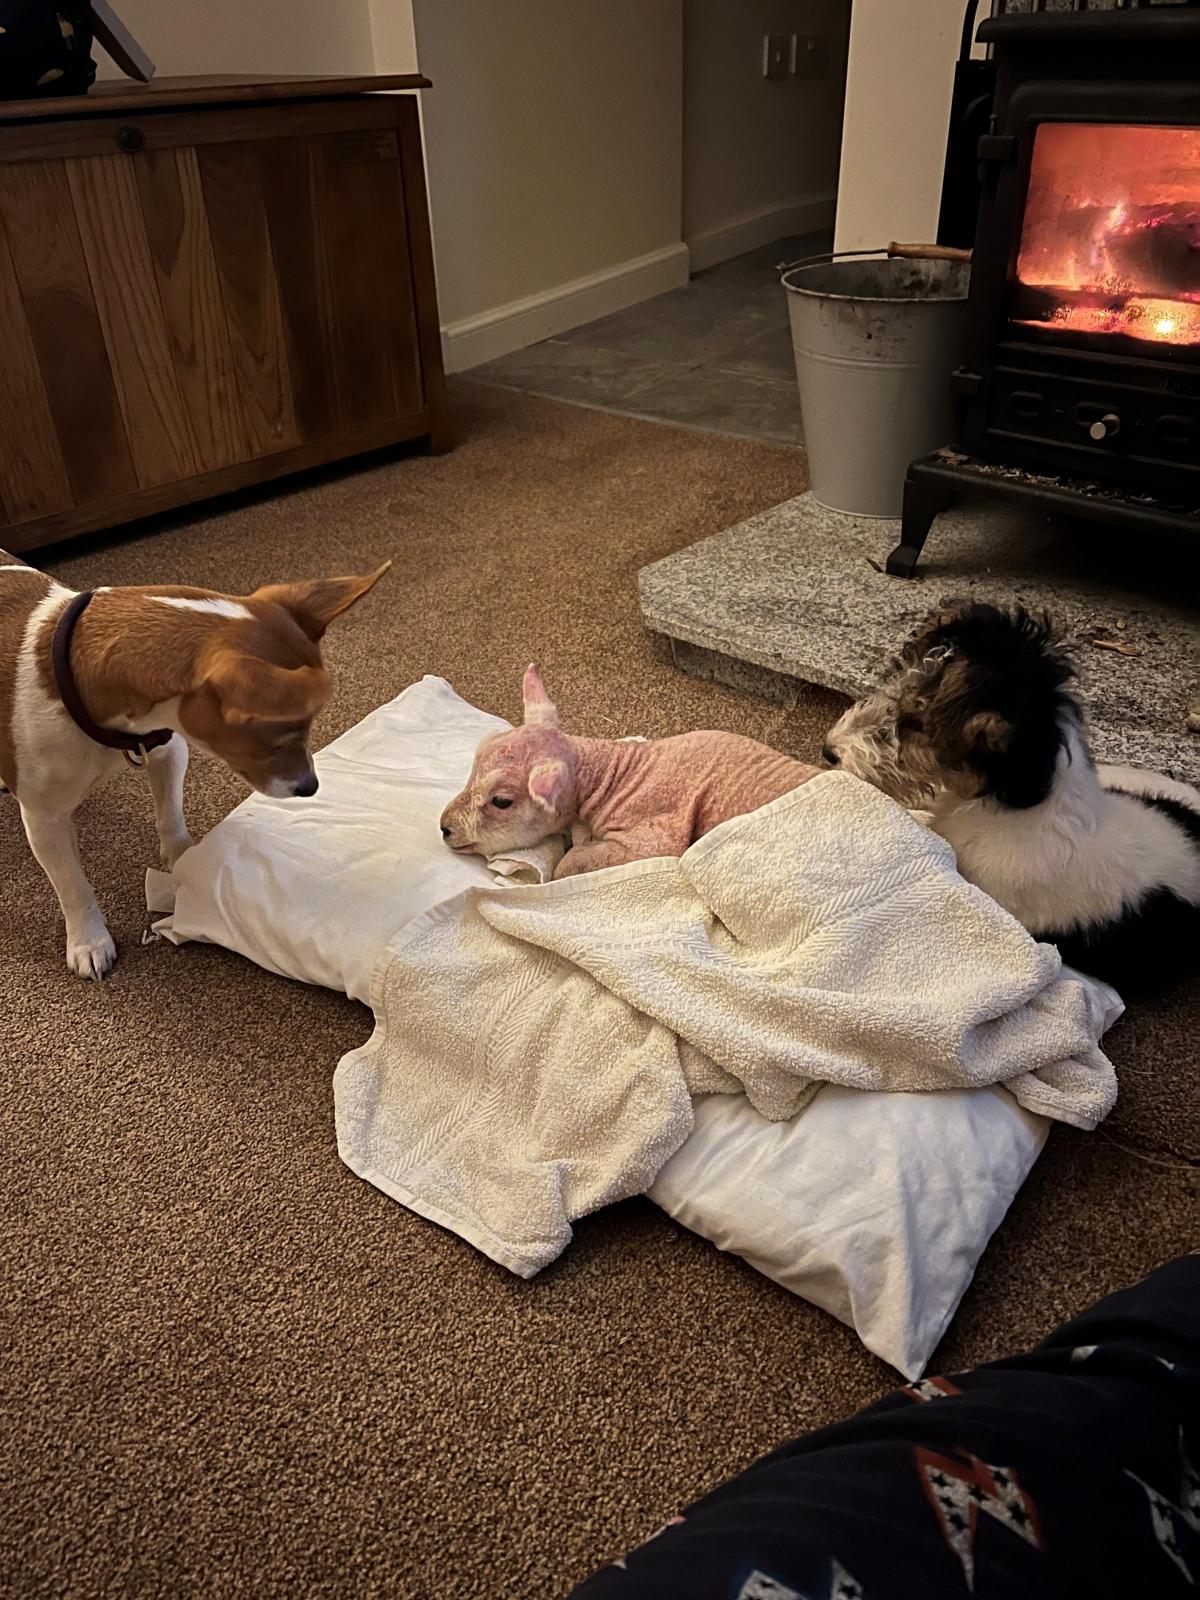 Nikki Sheed - Yogi the Jack Russell and Meg the Fox Terrier puppy wondering what this bald creature is mum brought into the house